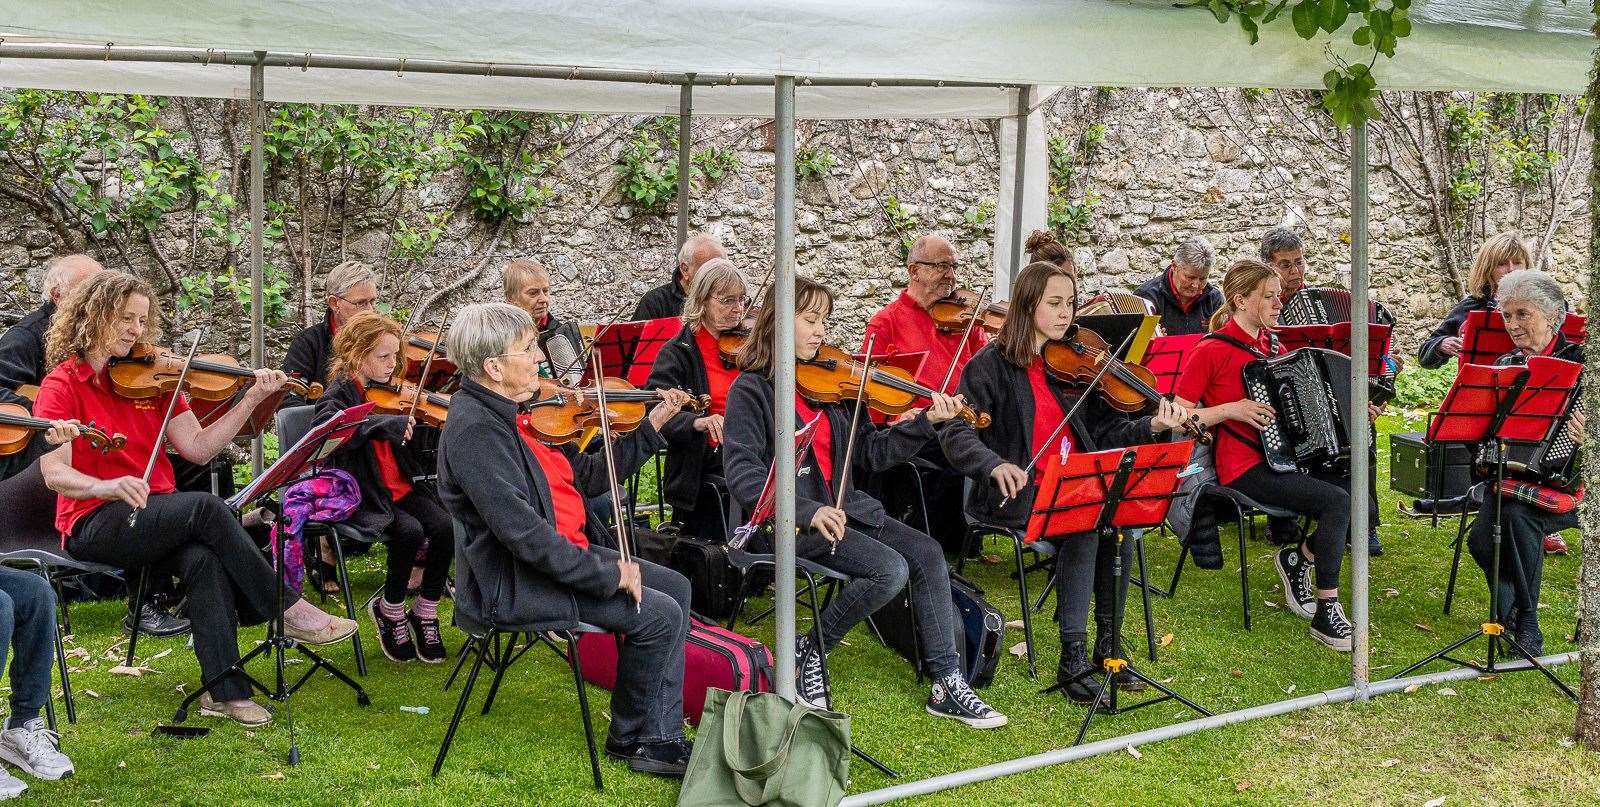 Strathfleet Buttons and Bow were among the groups that provided musical entertainment. Picture: East Sutherland Camera Club